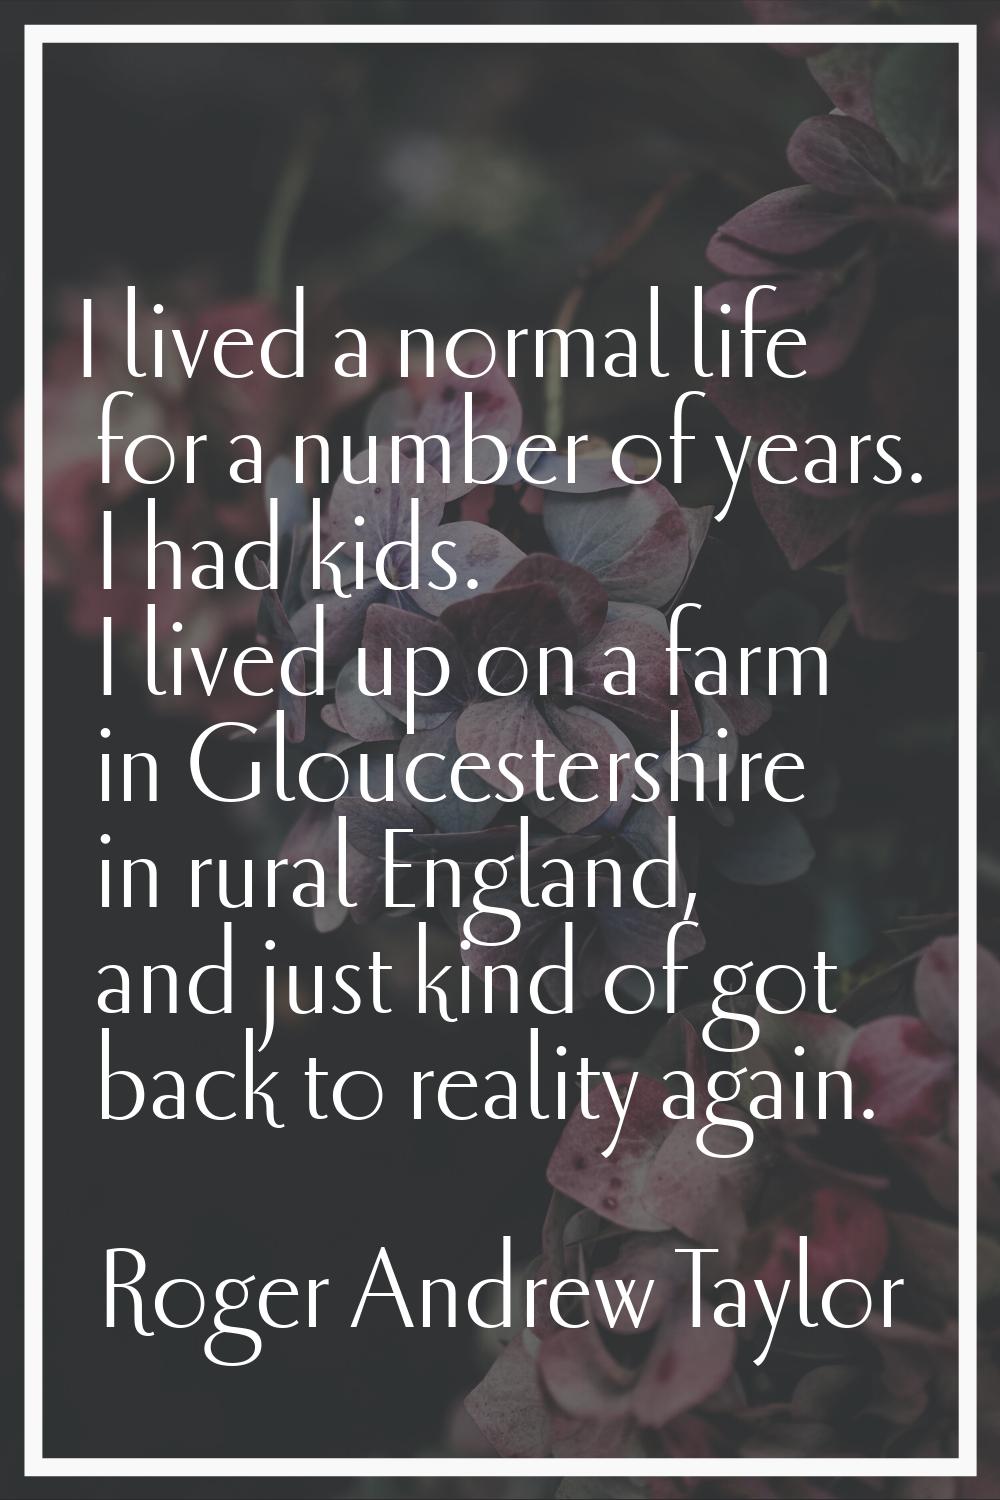 I lived a normal life for a number of years. I had kids. I lived up on a farm in Gloucestershire in